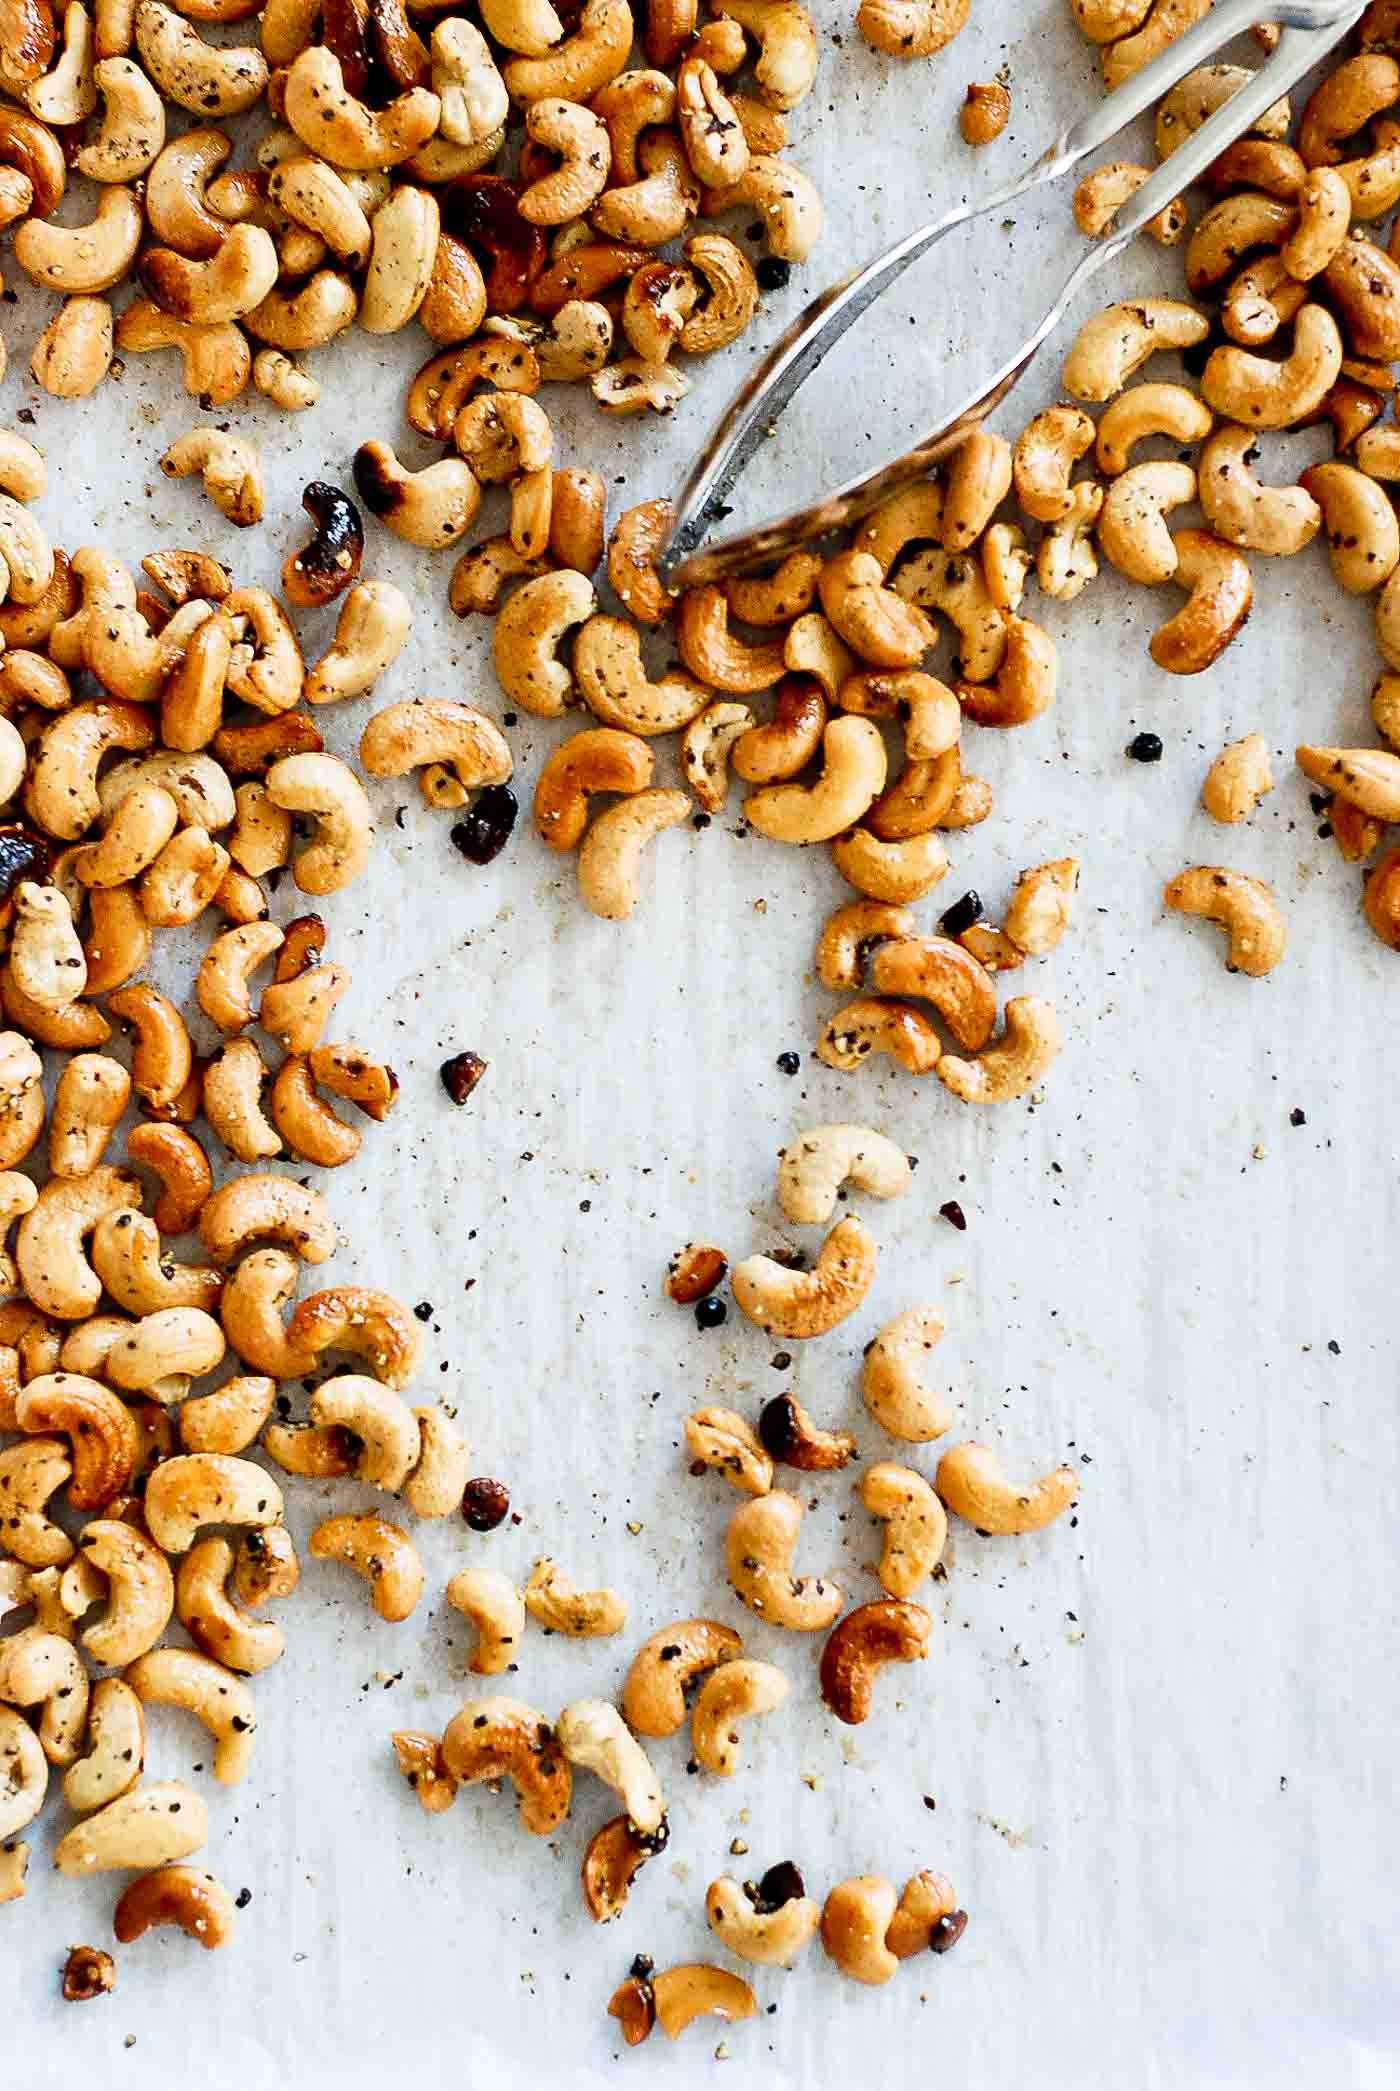 salt and pepper cashews on baking tray.